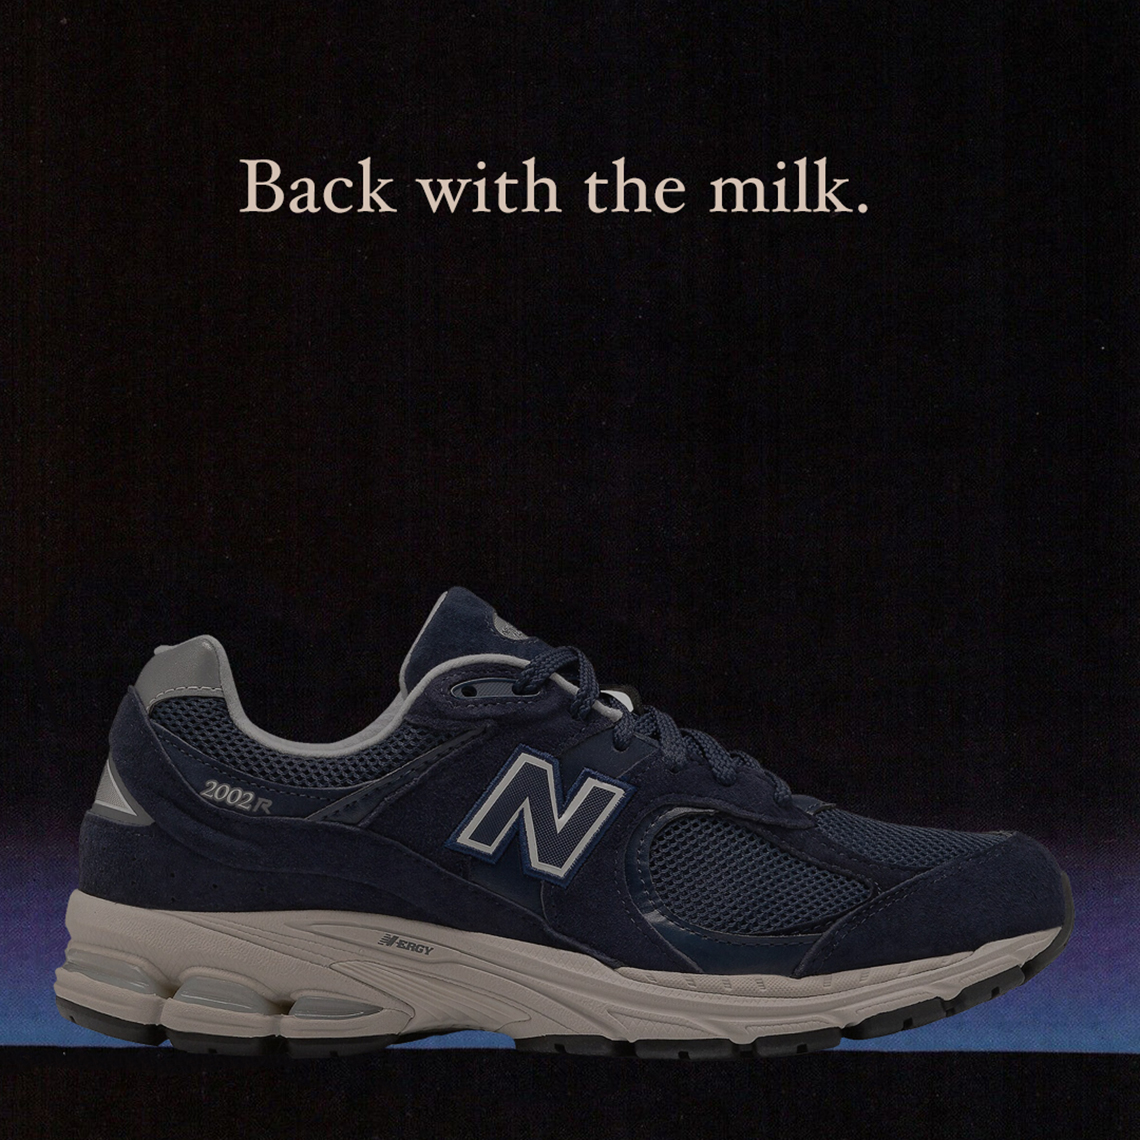 The Best New Balance Holiday 2020 Shopping Guide - SneakerNews.com